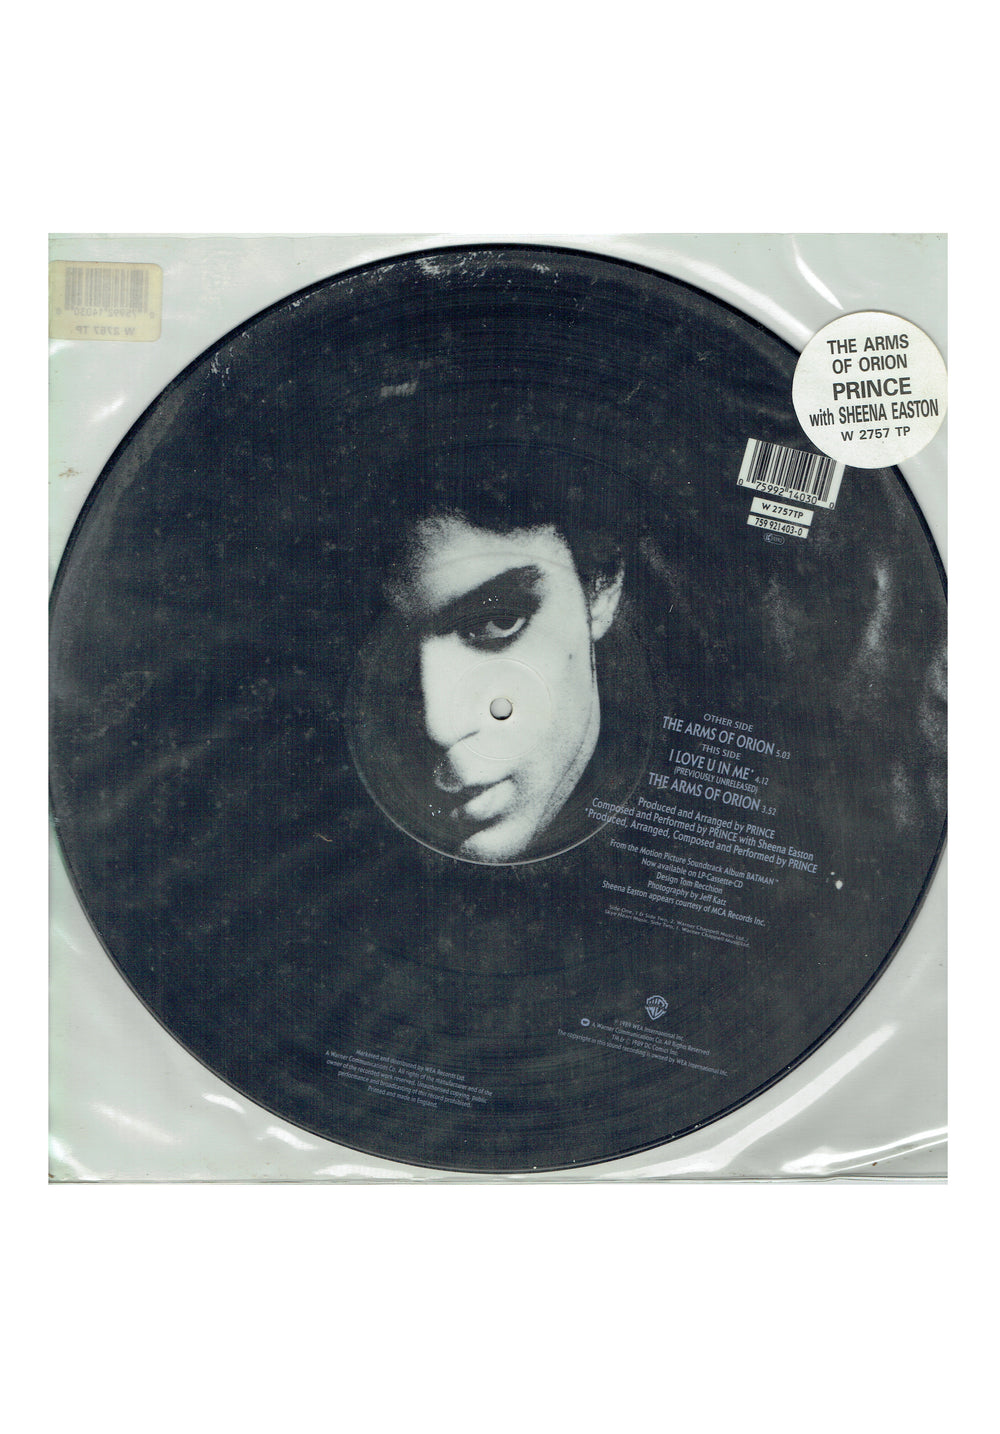 Prince – & Sheena Easton The Arms Of Orion Vinyl 12" Single Picture Disc Hype UK Preloved: 1989